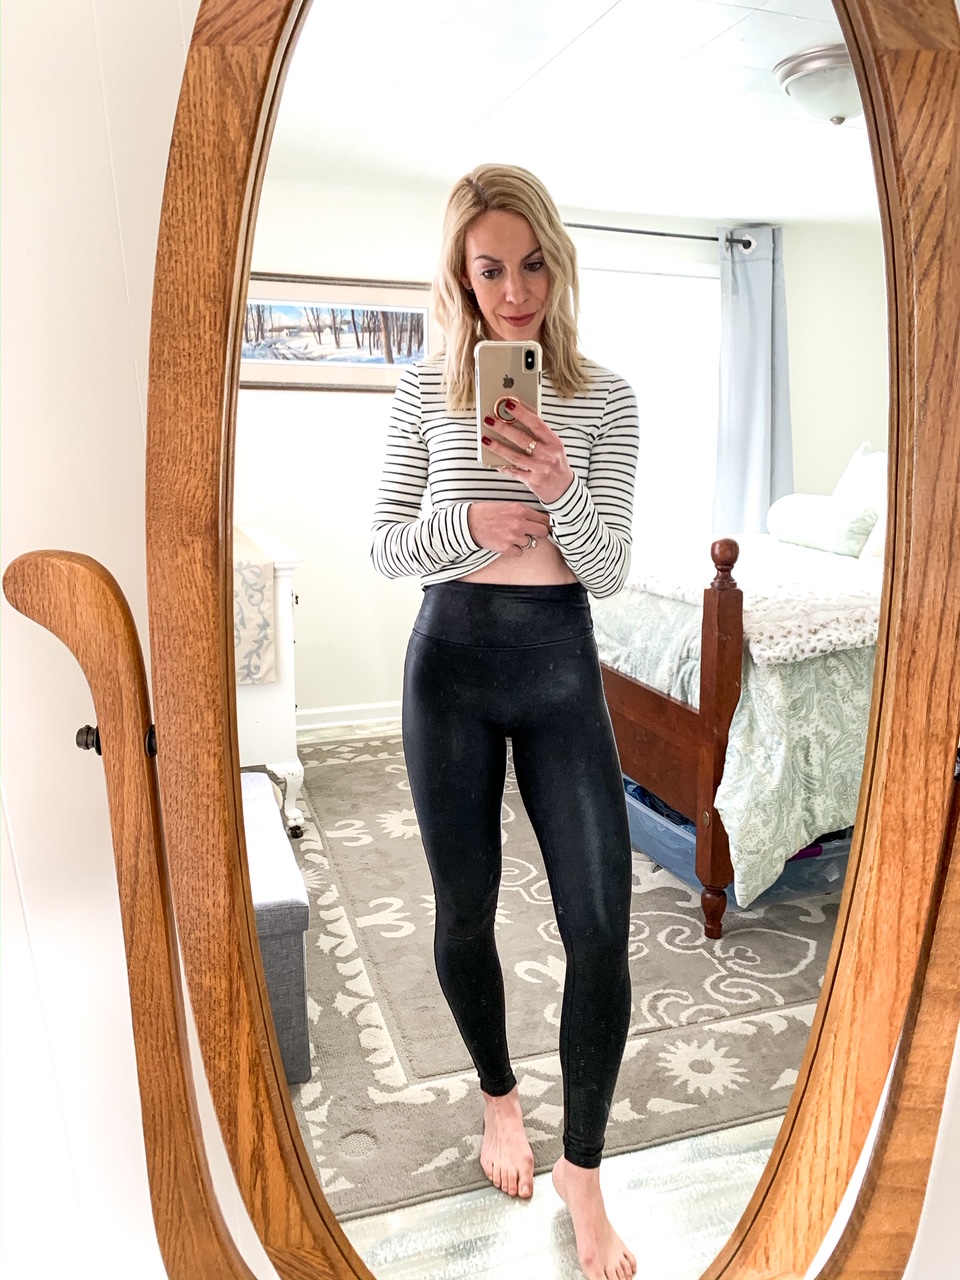 spanx VS @WearCommando faux leather leggings. Which are your favorite